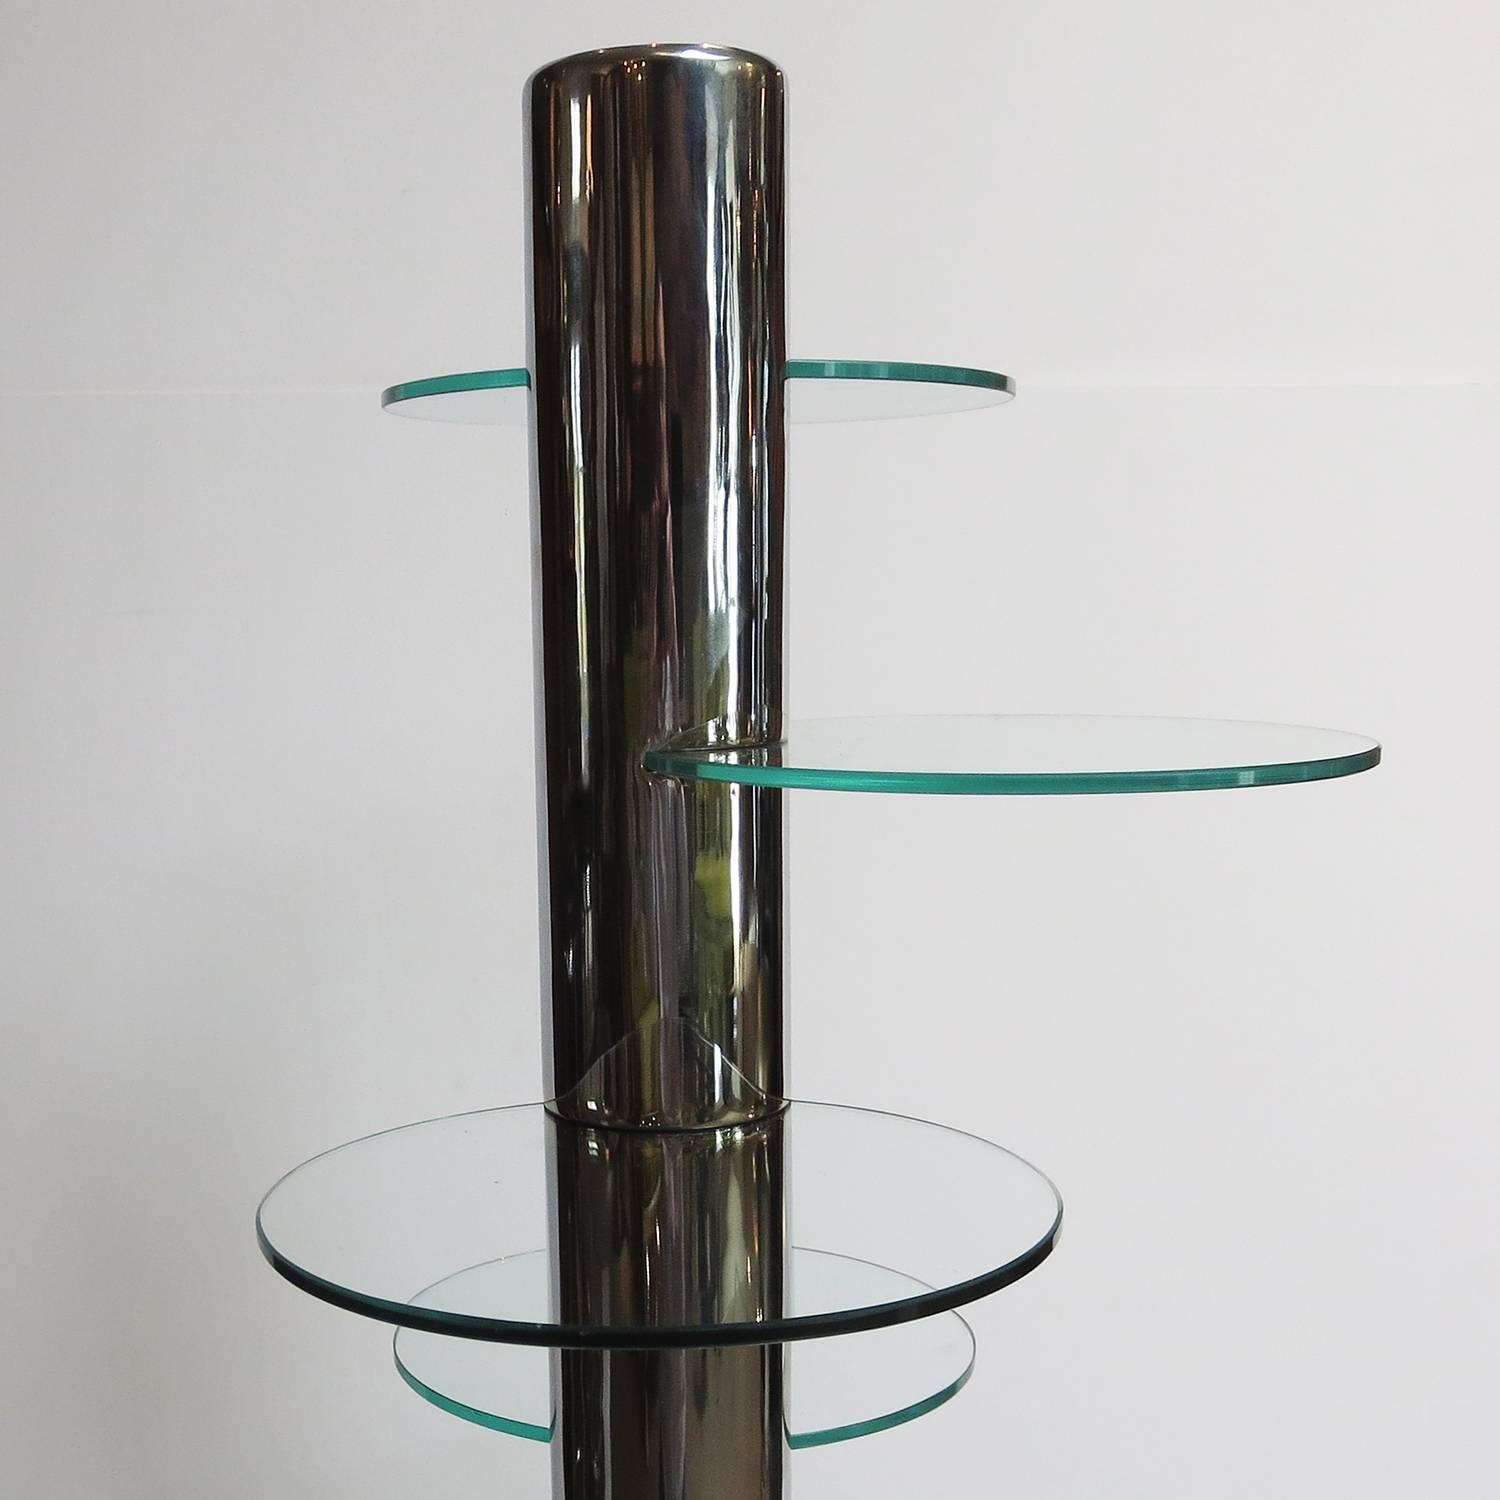 Plated Art Deco Restored Chrome Display Unit by Multiform Displays of London